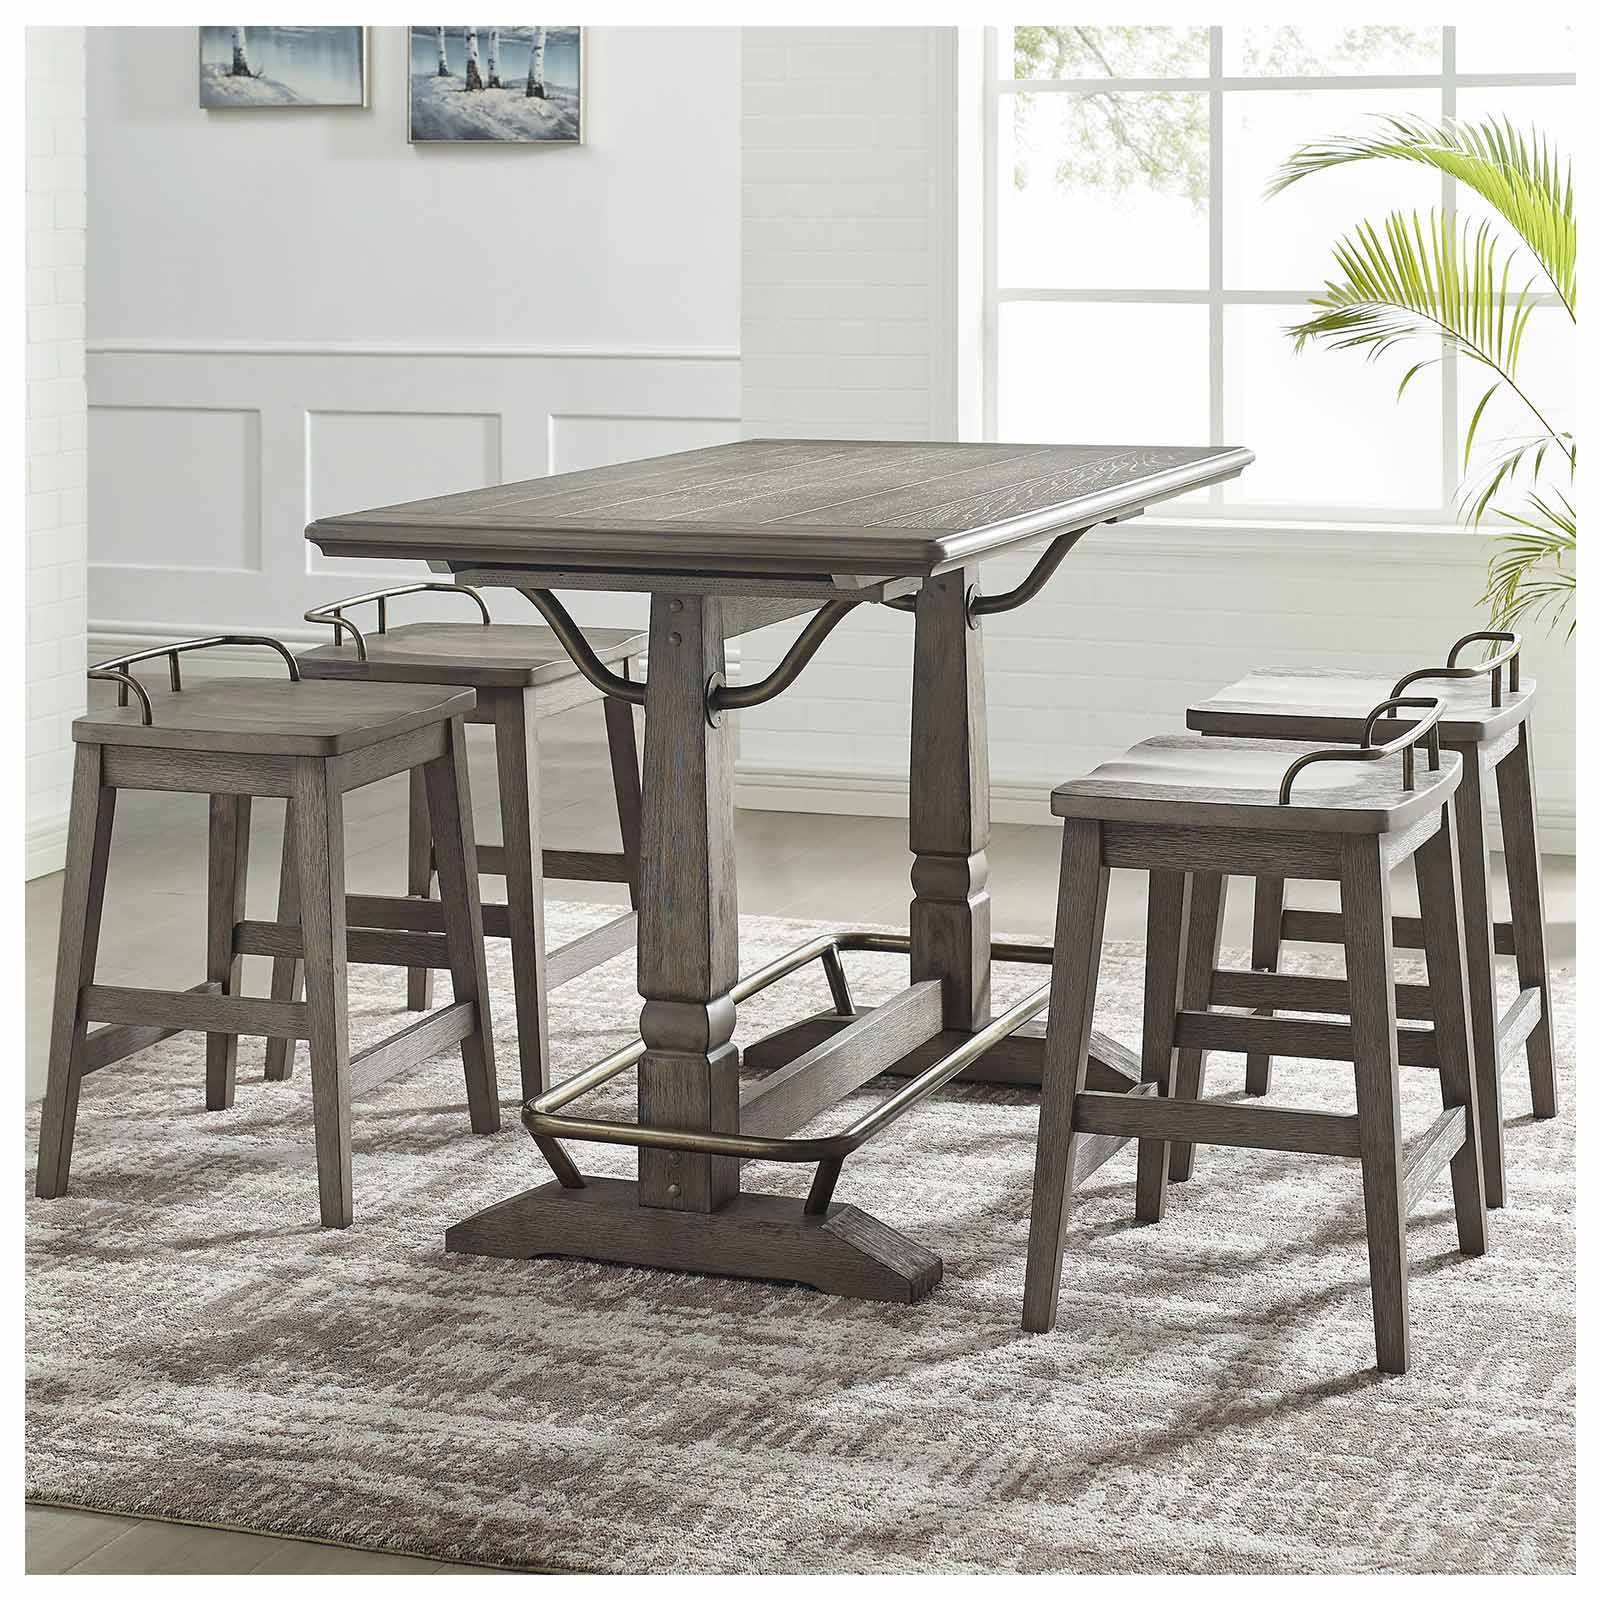 Steve Silver Co. Ryan Gathering Table and Four Counter Stools